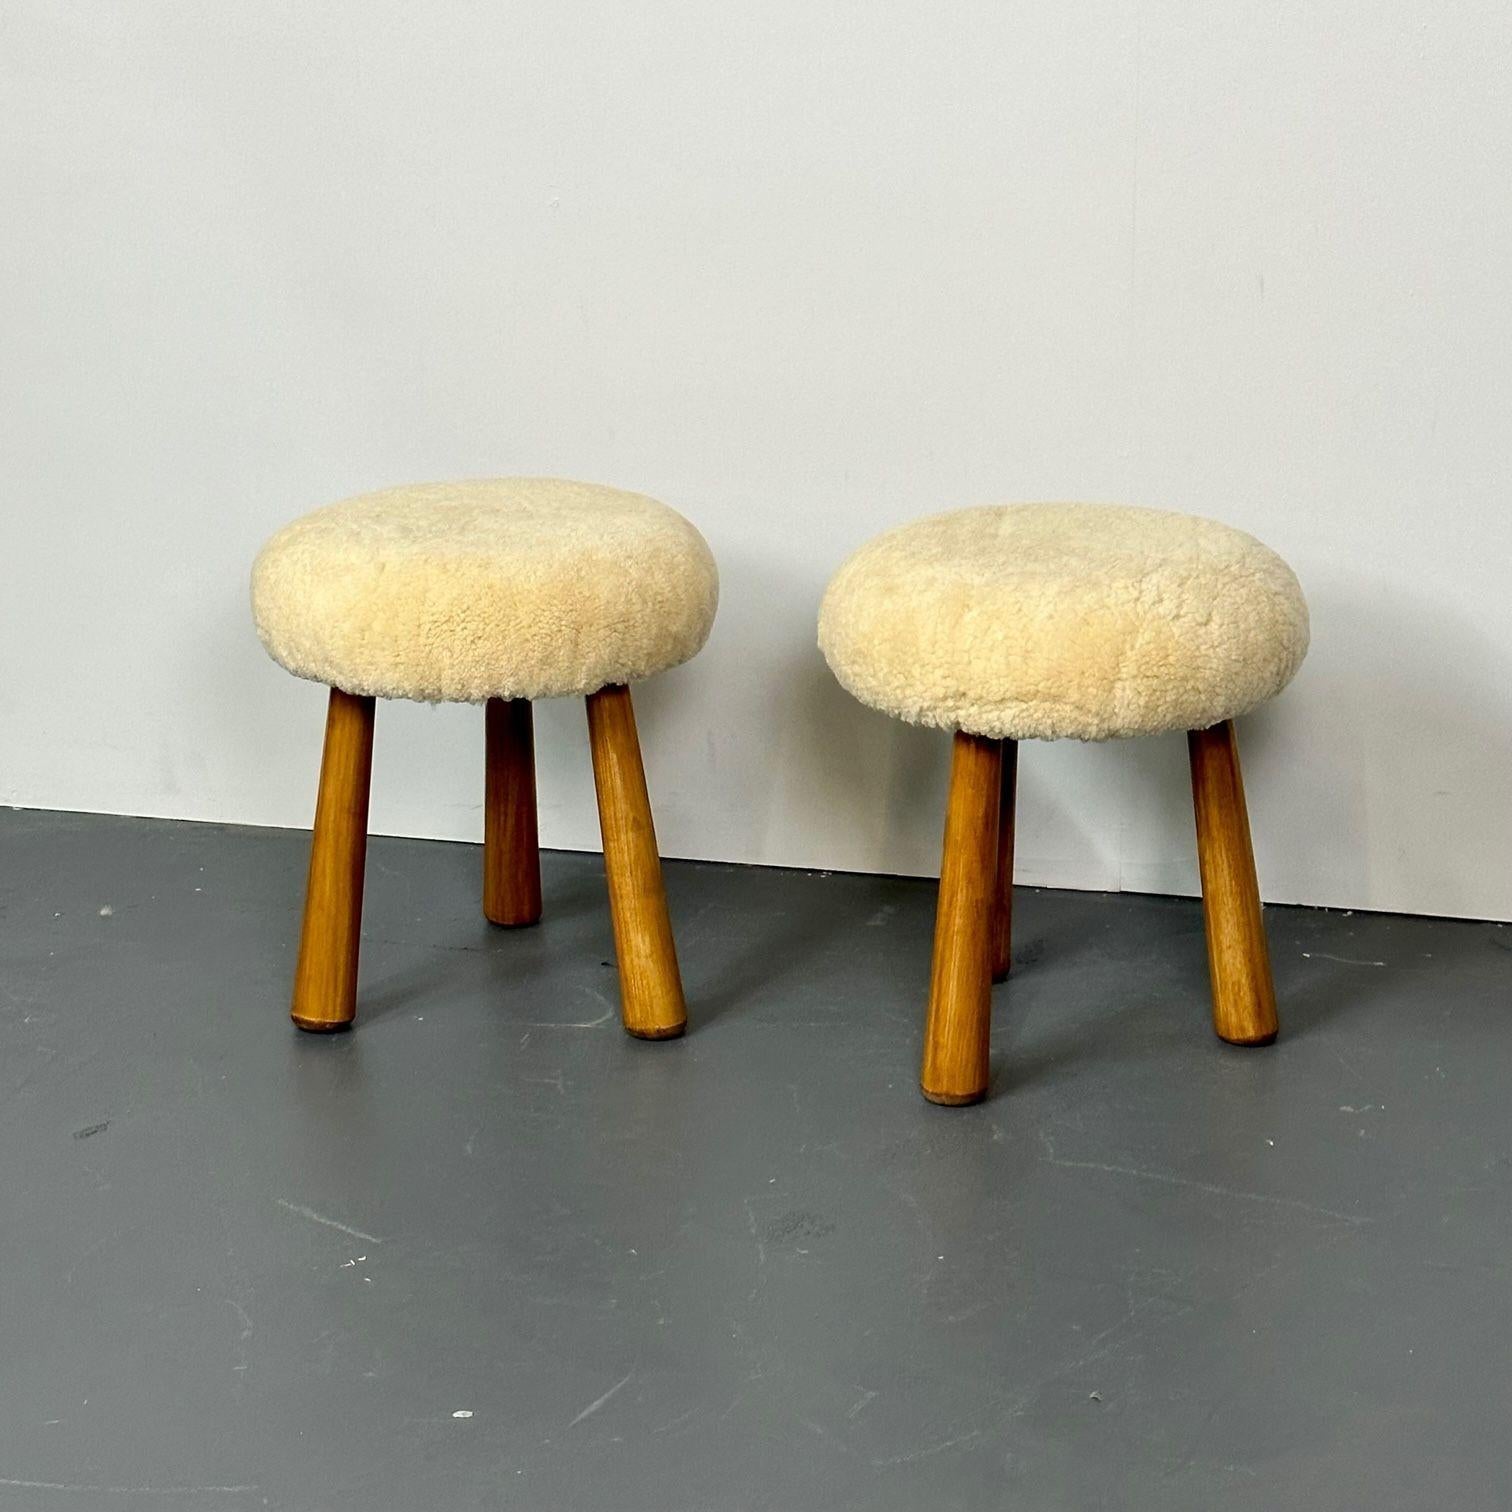 Pair of Contemporary Scandinavian Modern Style Beige Sheepskin Stools / Ottomans In Good Condition For Sale In Stamford, CT